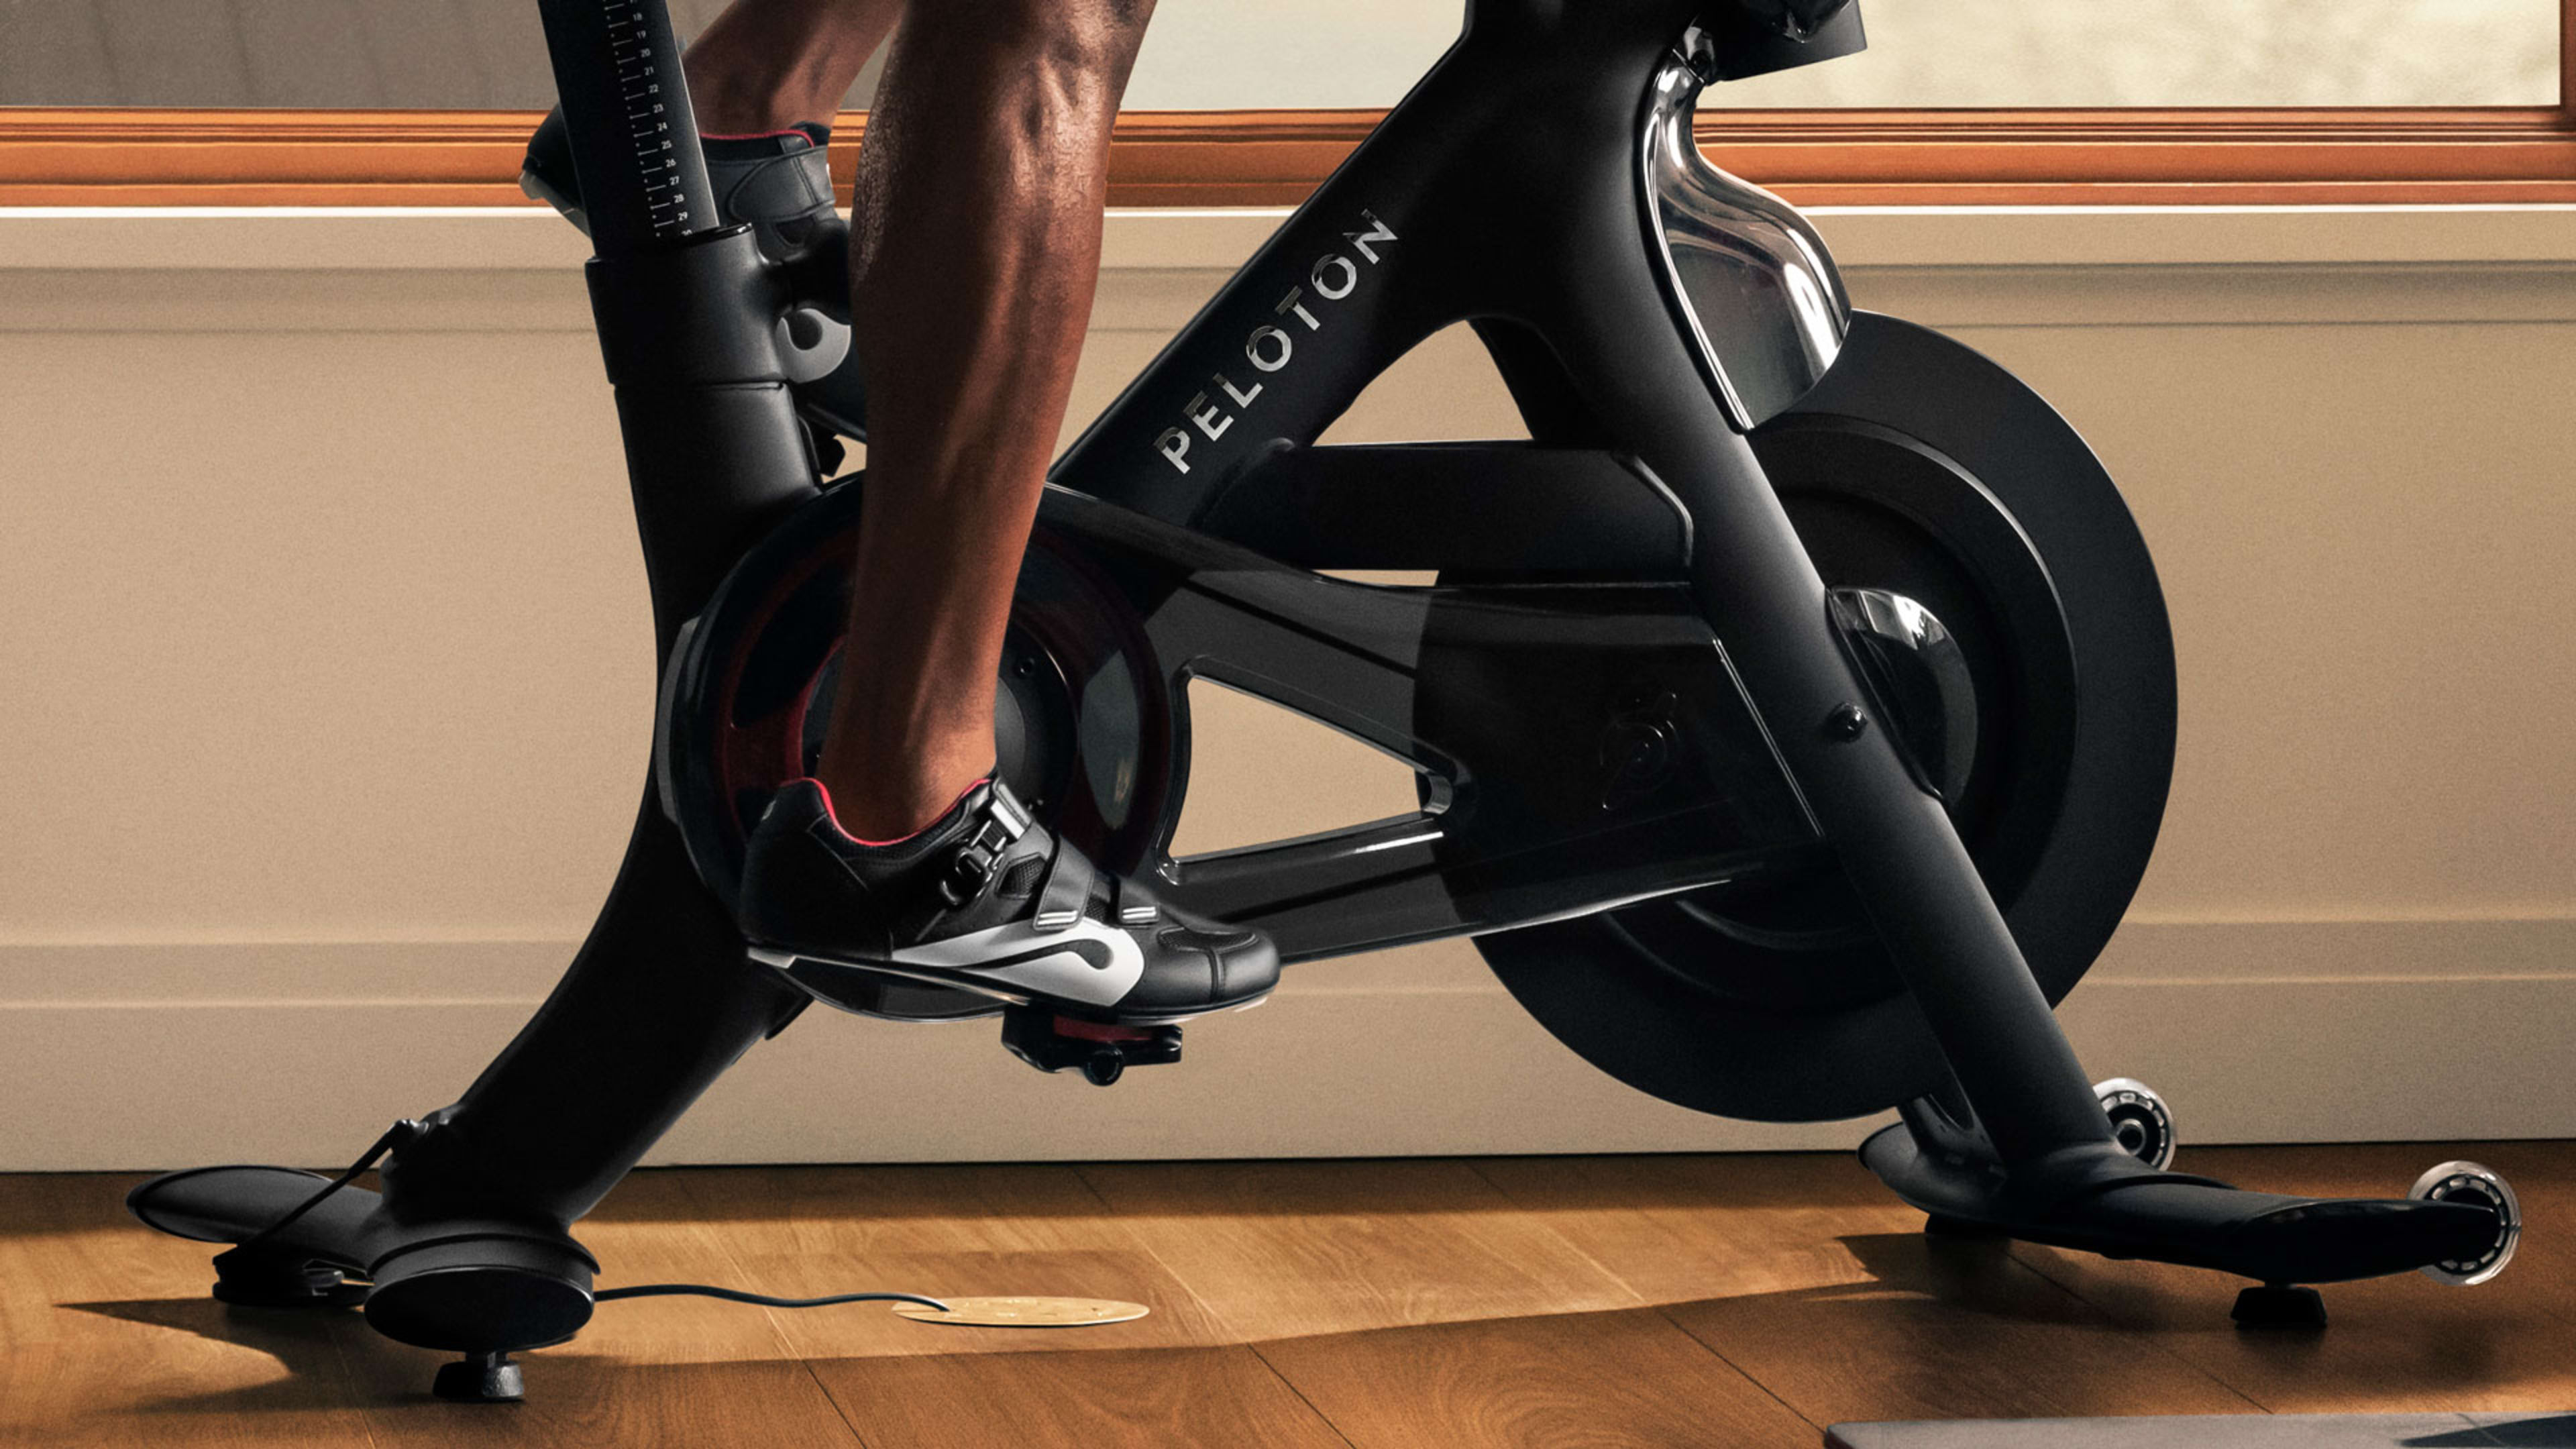 Peloton pedal recall: Here’s everything you need to know after reports of leg injuries